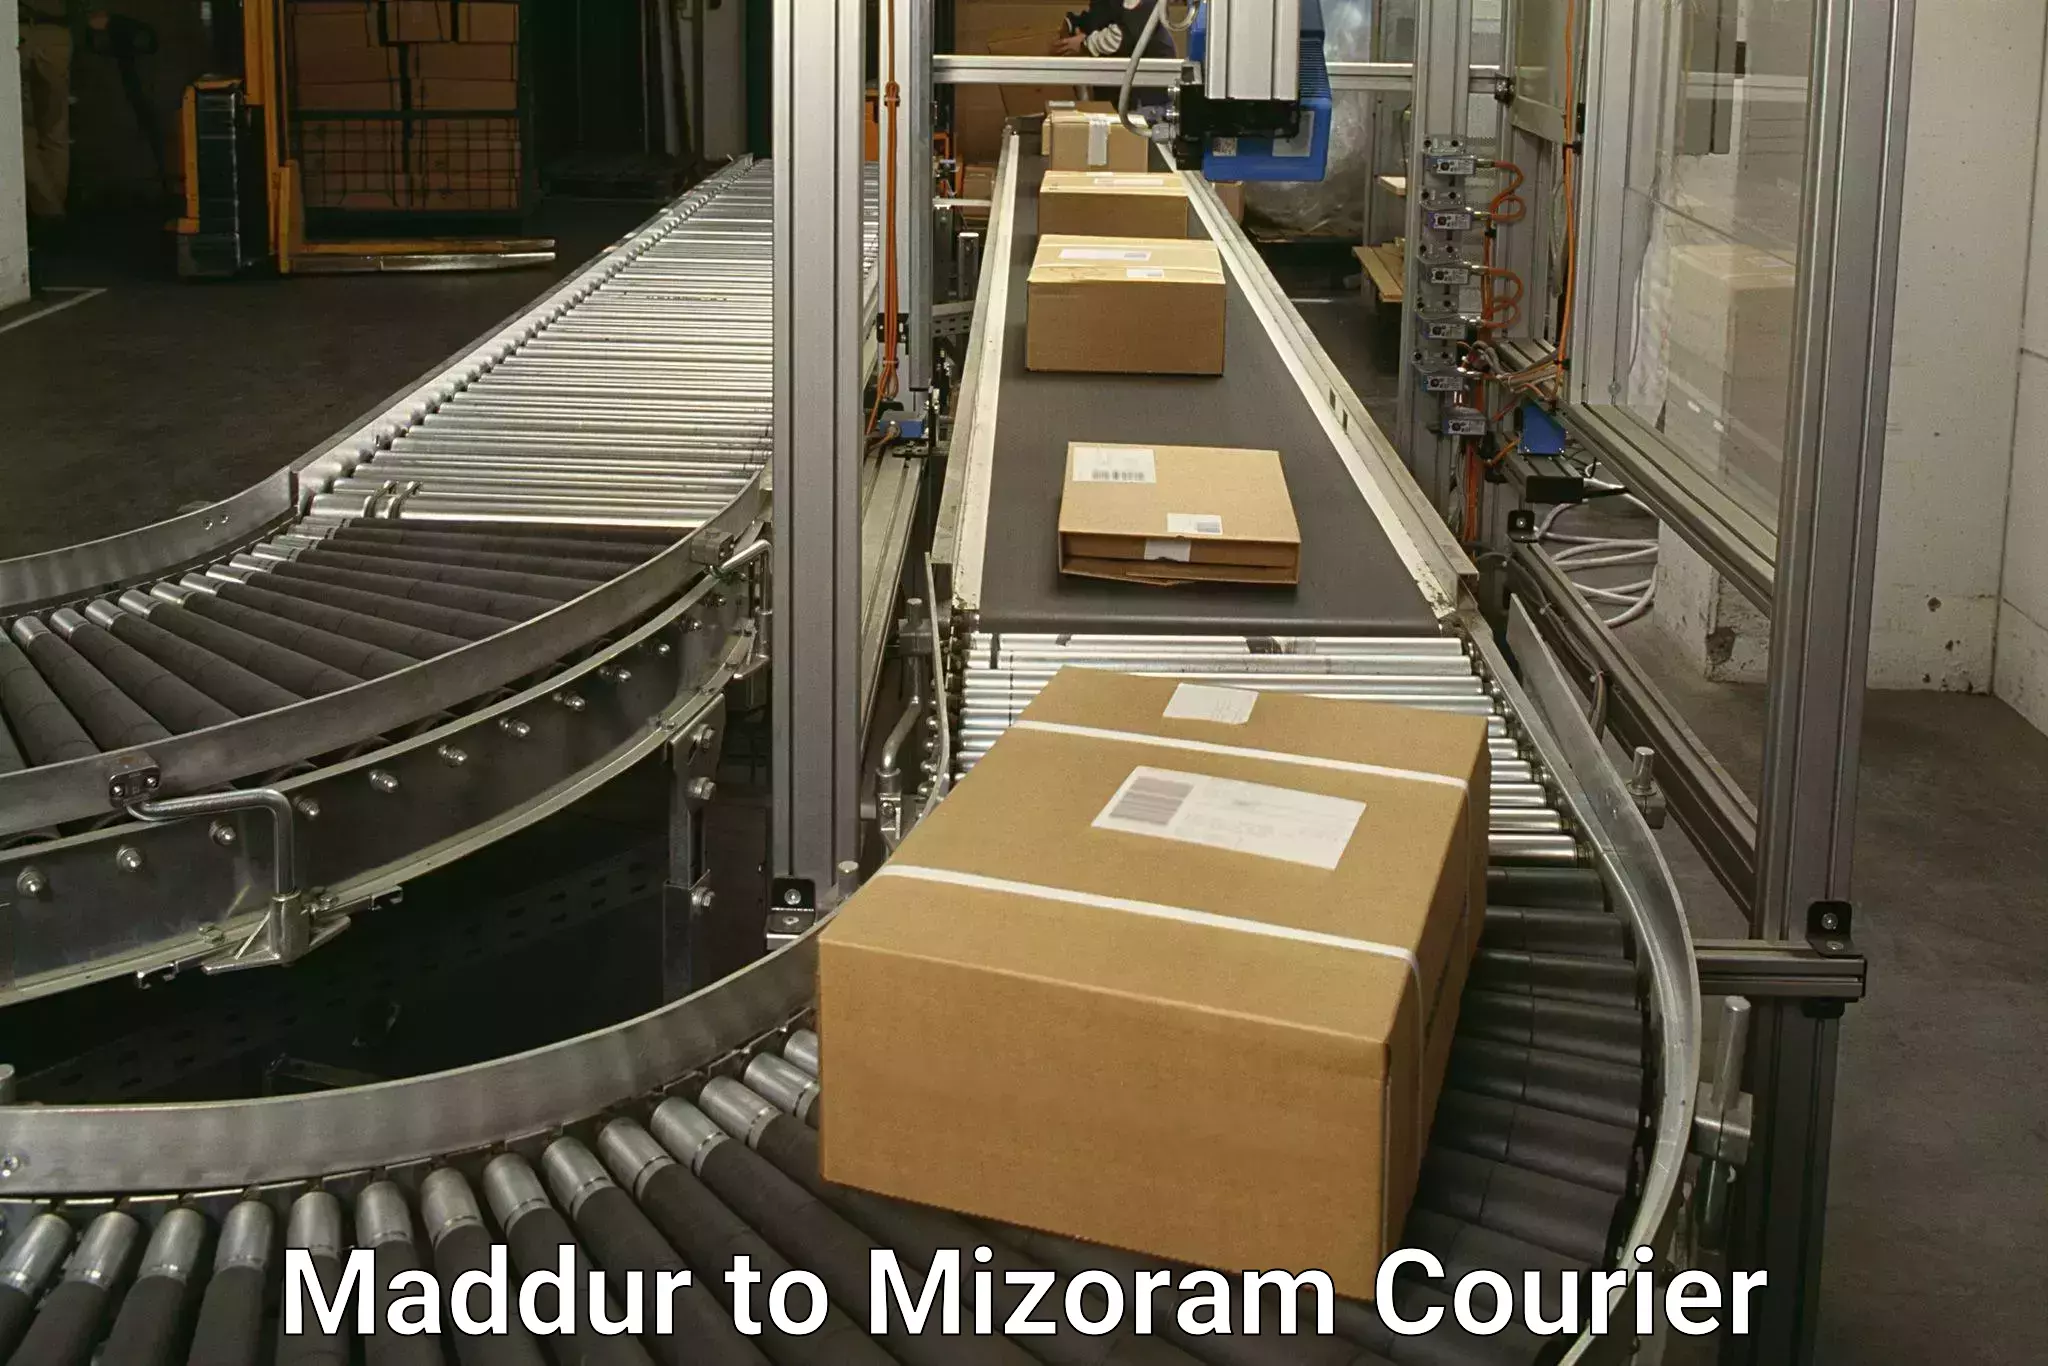 Fast delivery service Maddur to Mizoram